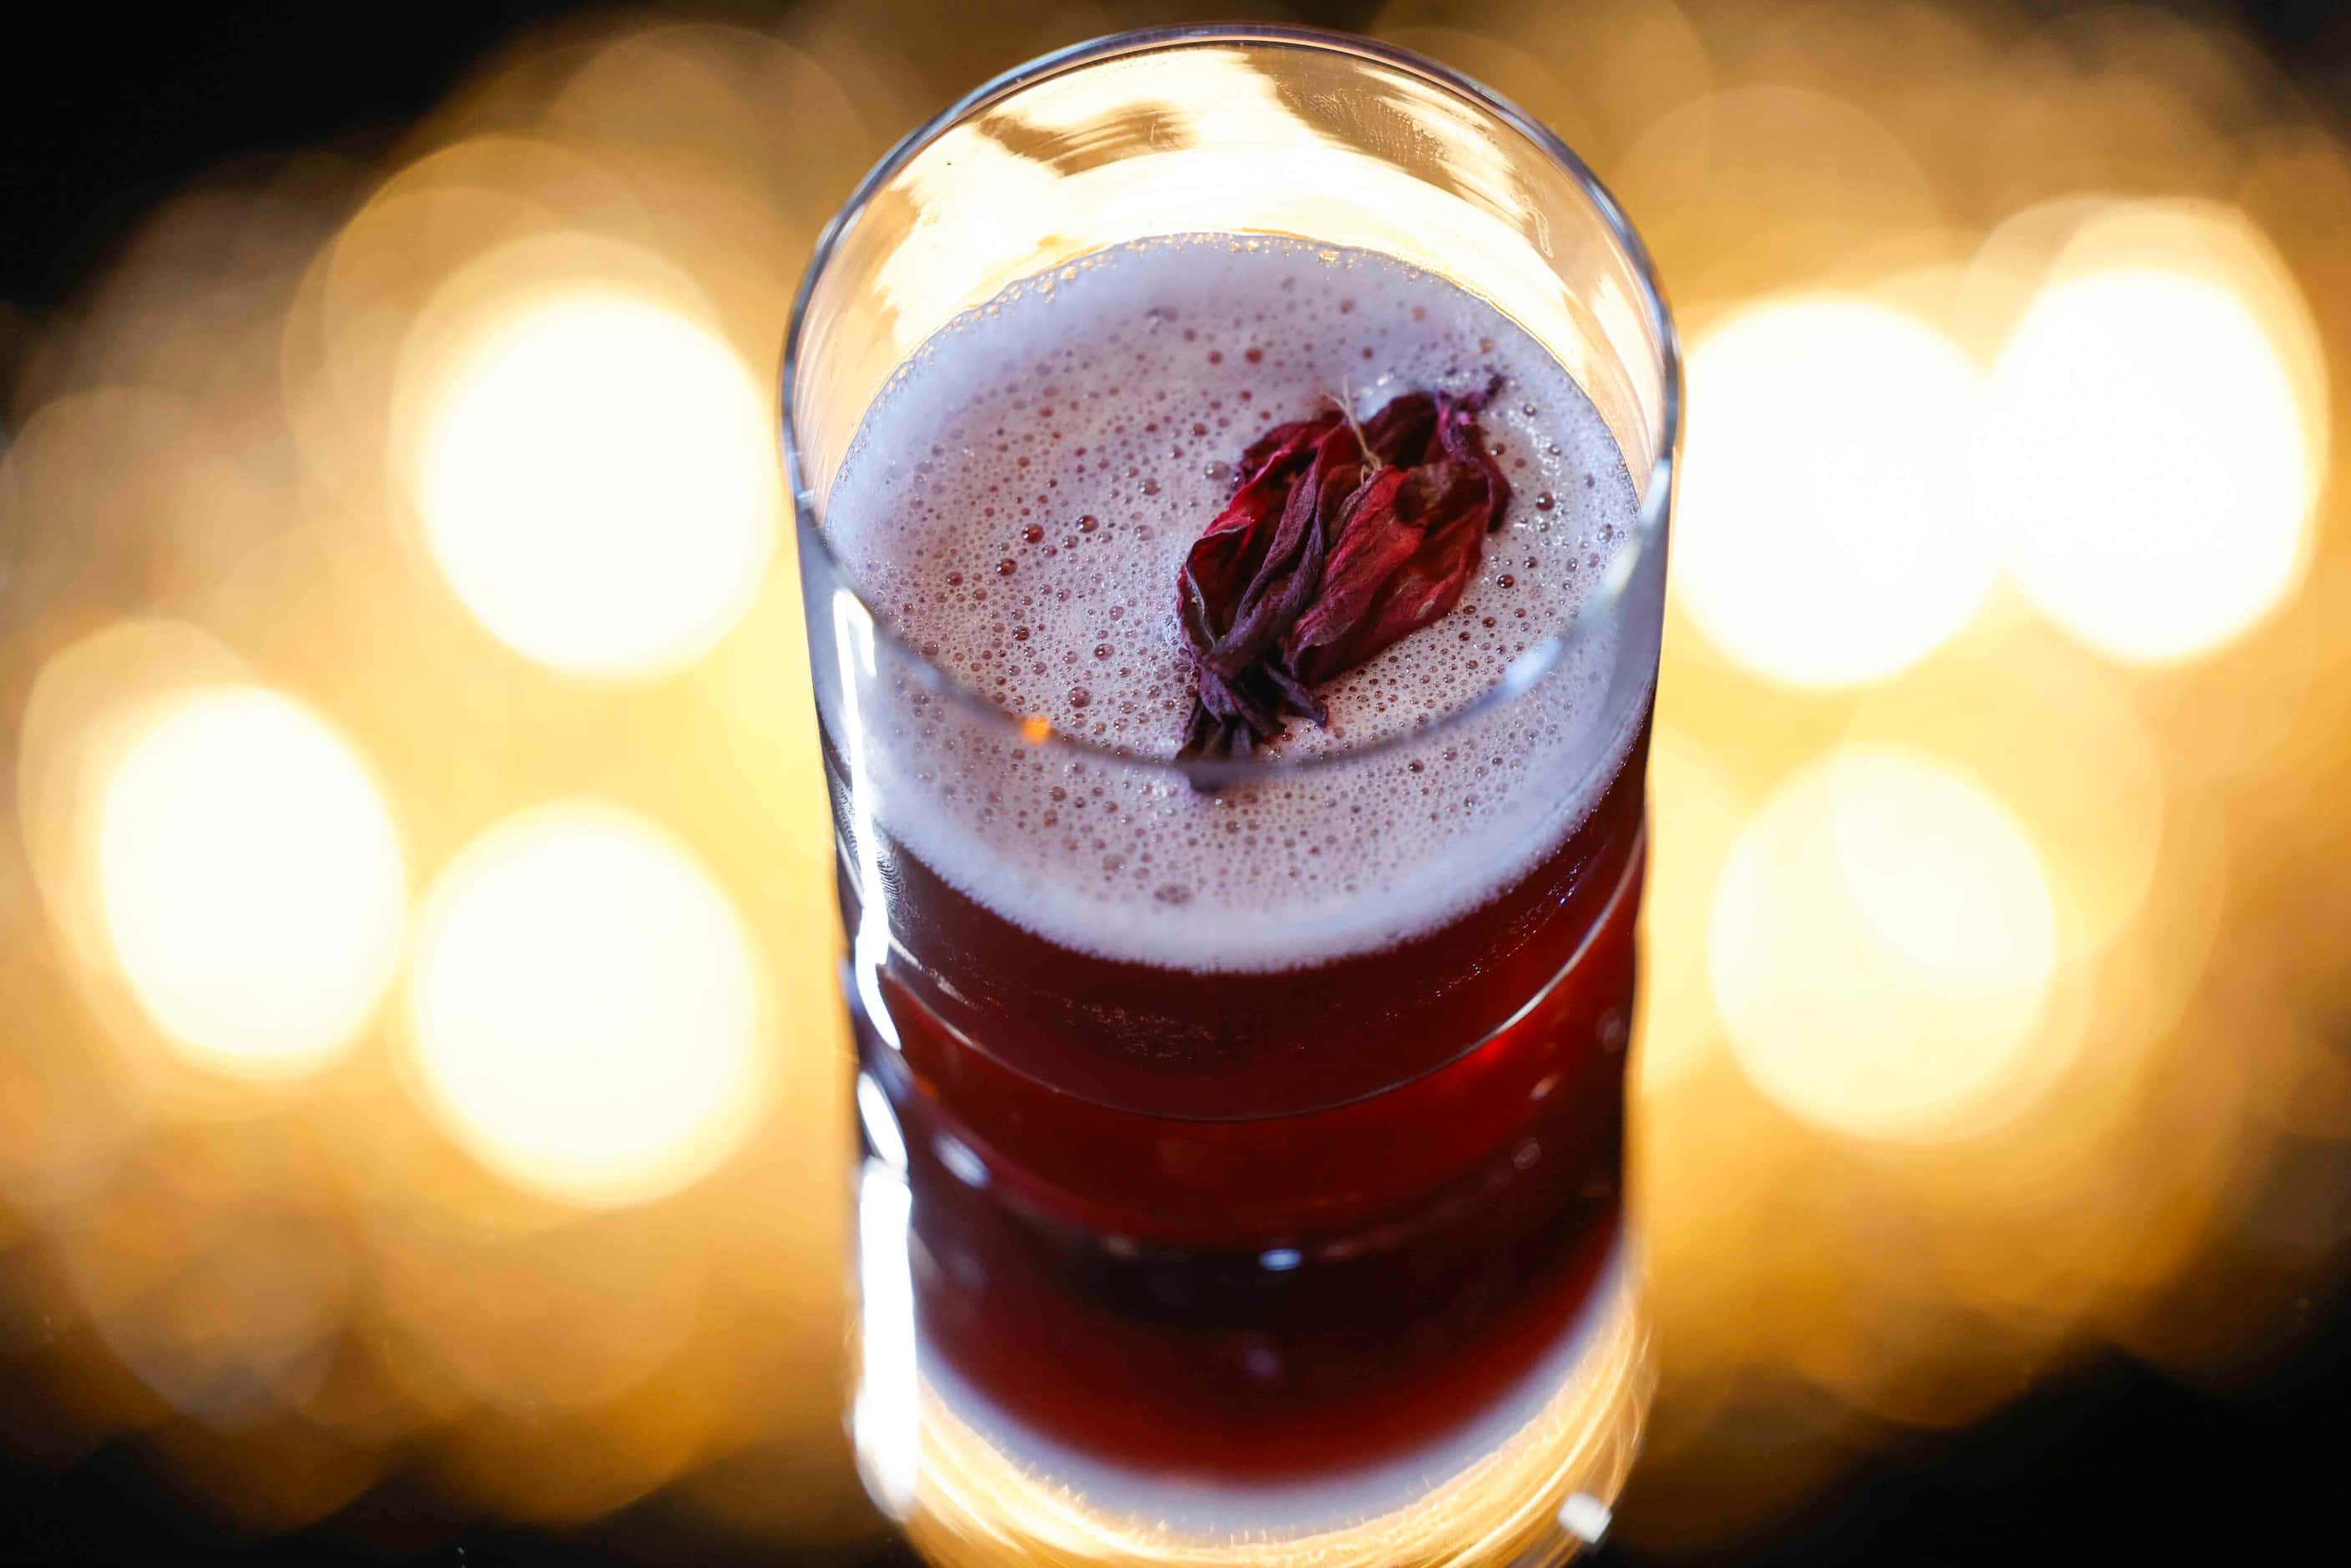 Cafe Nubia's Zobo Old-Fashioned uses dried flowers. 